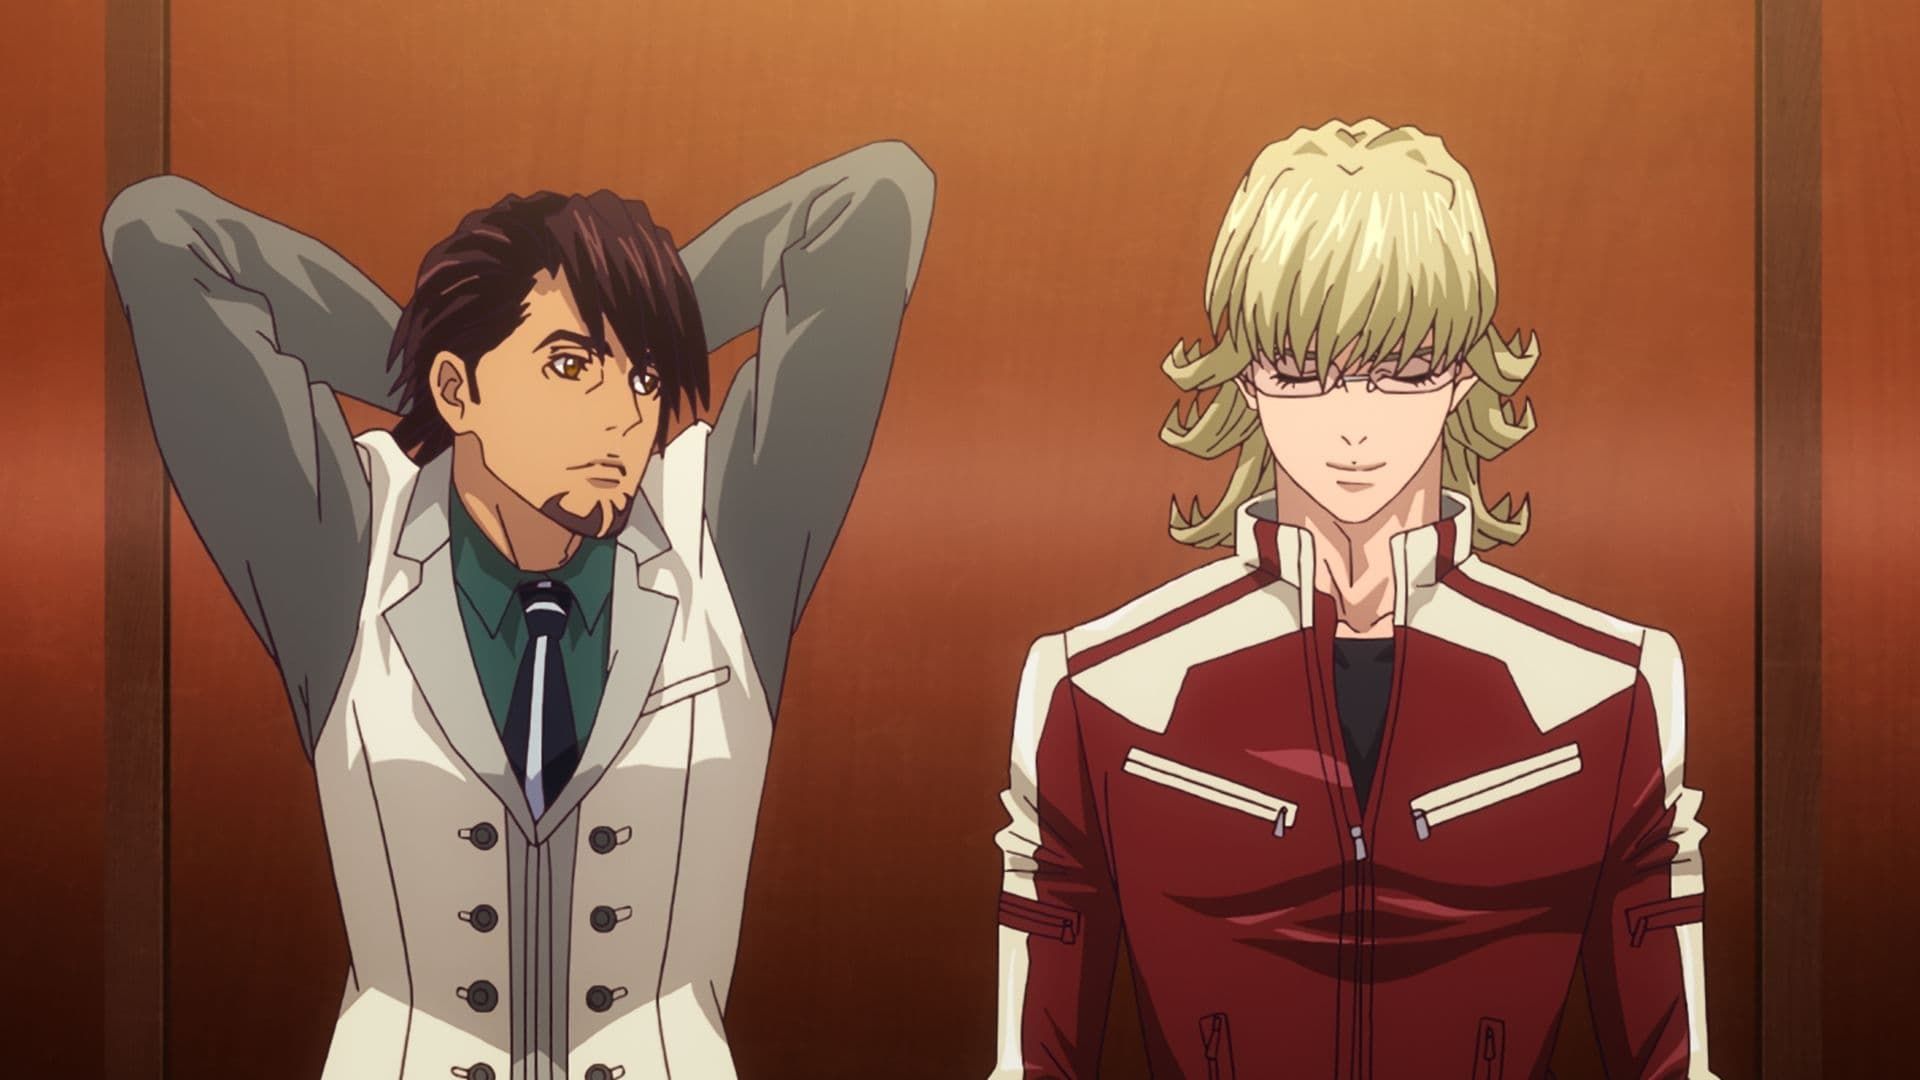 Tiger & Bunny background